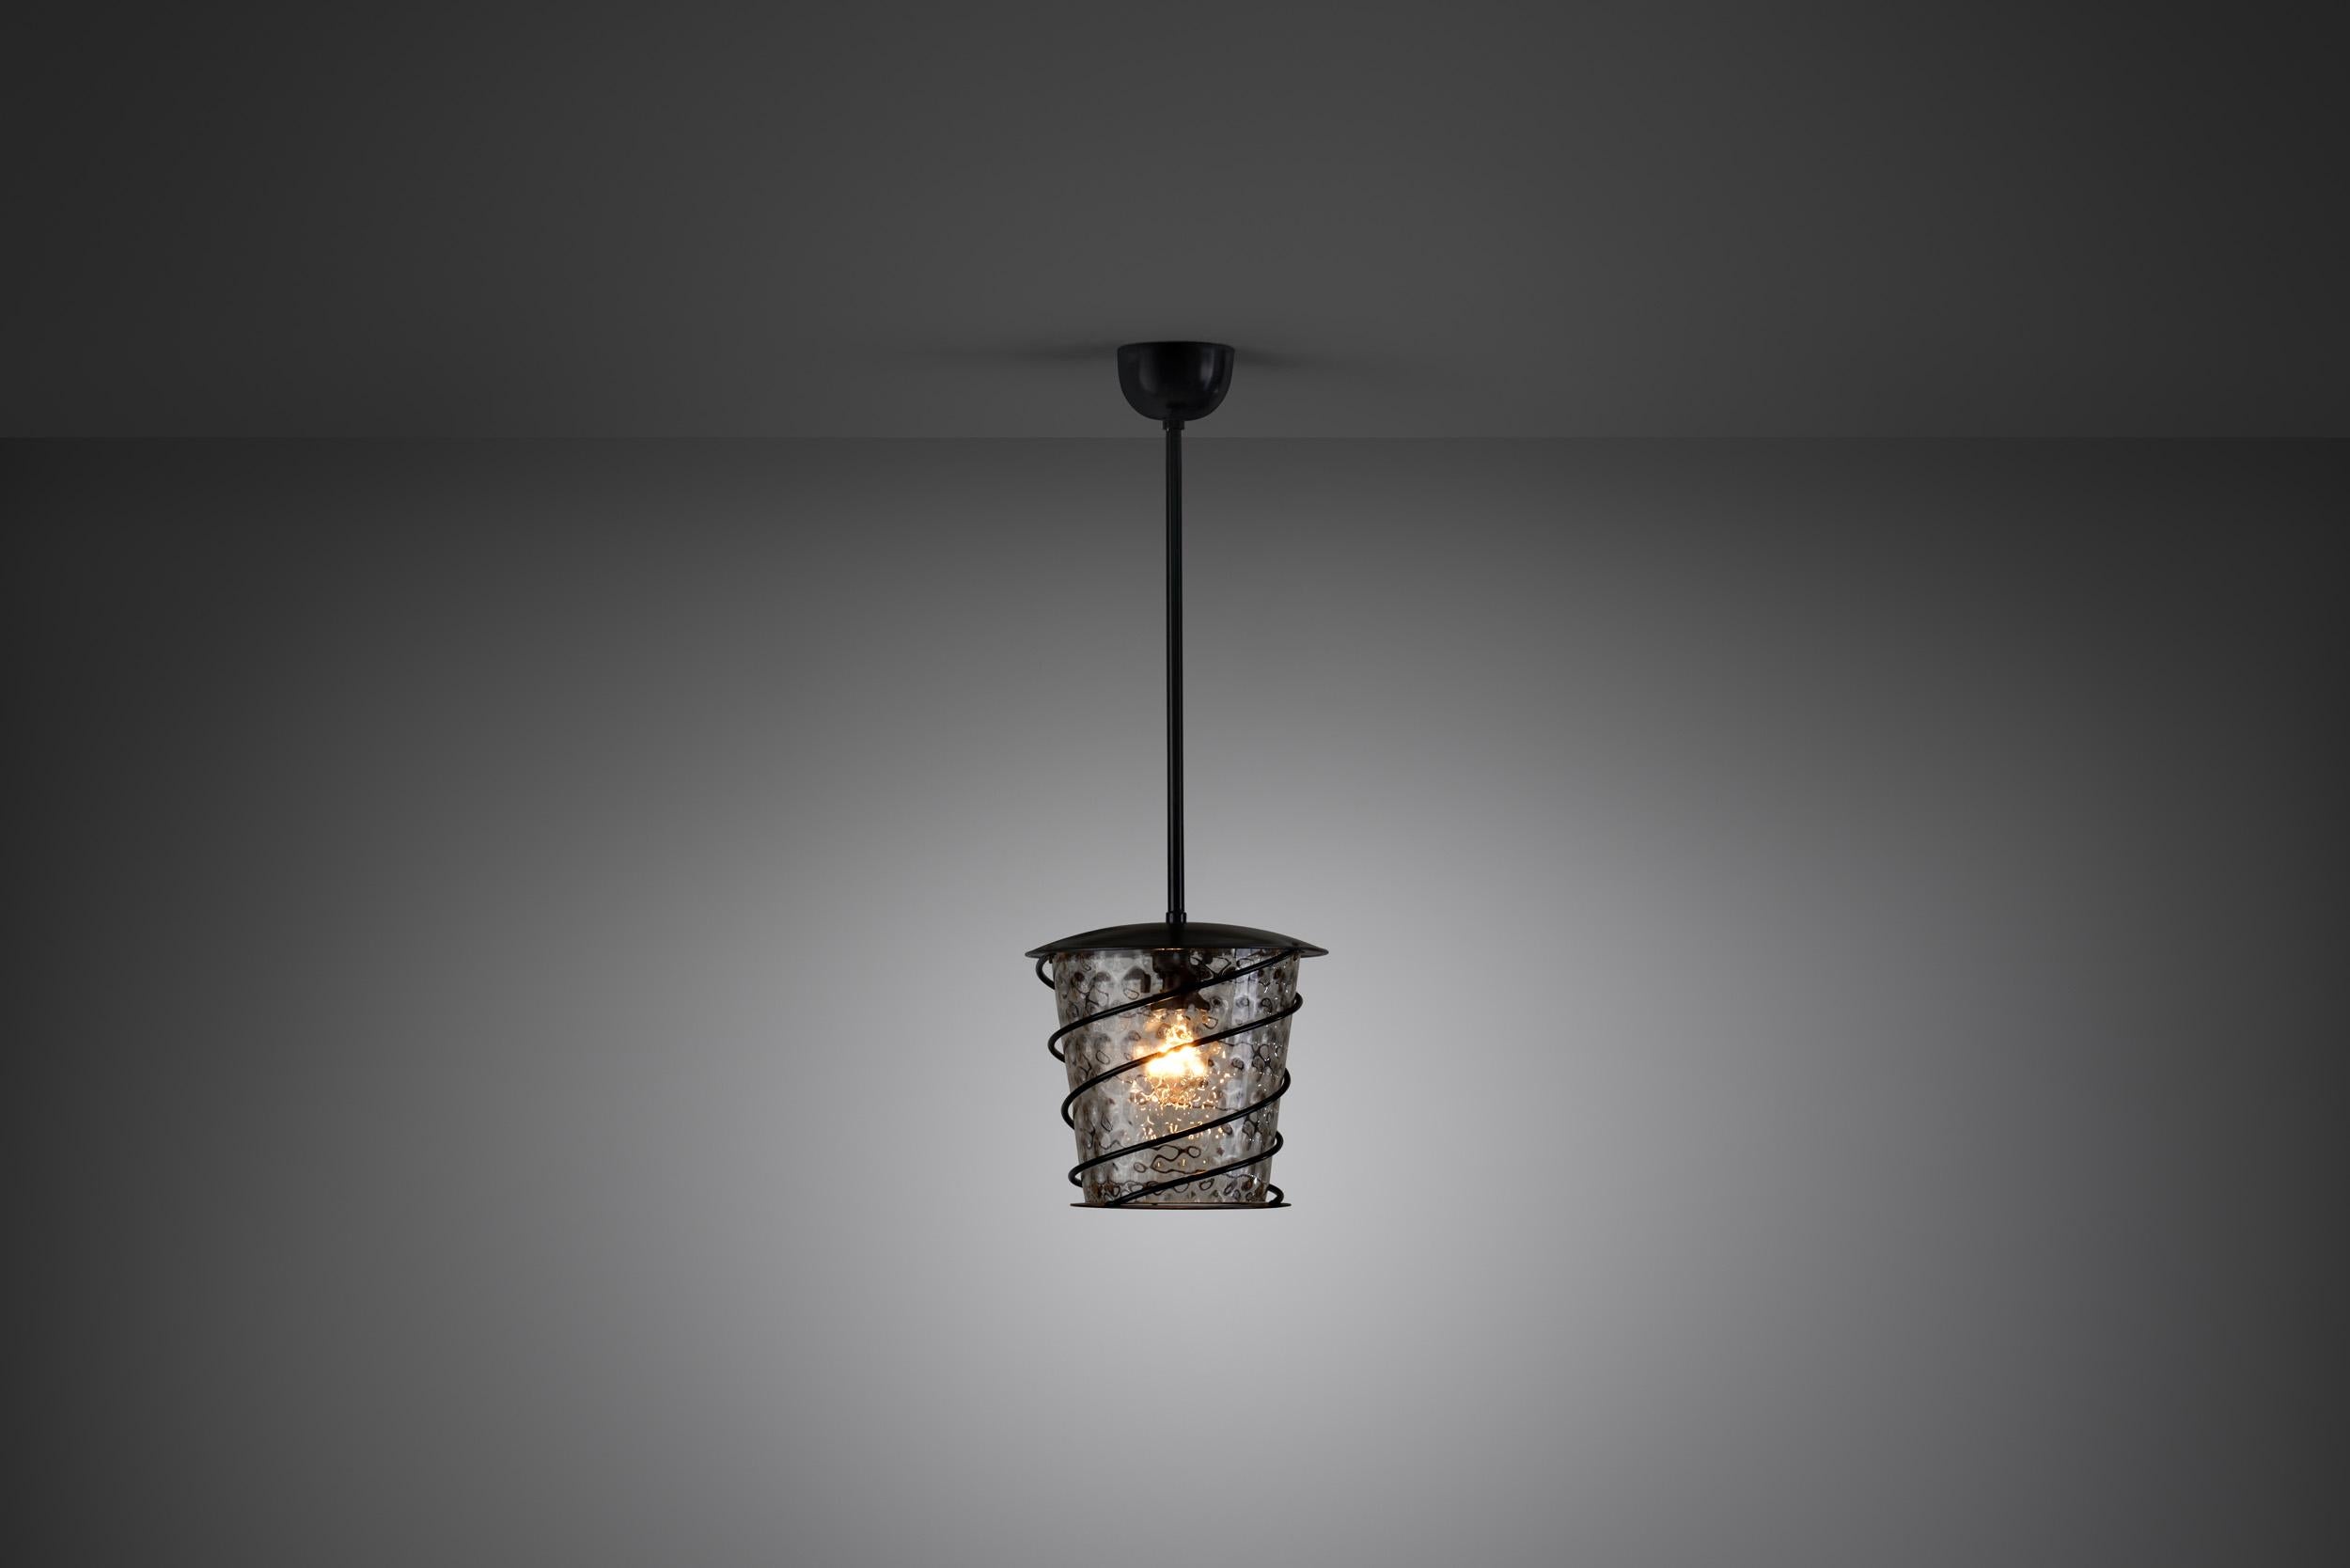 Lighting is a huge part of Scandinavian design, ranging from the warm, low light of a candle to the bright overhead glow of a ceiling light. This early 20th century ceiling lamp is a unique piece of functionalist design with the unmistakeable